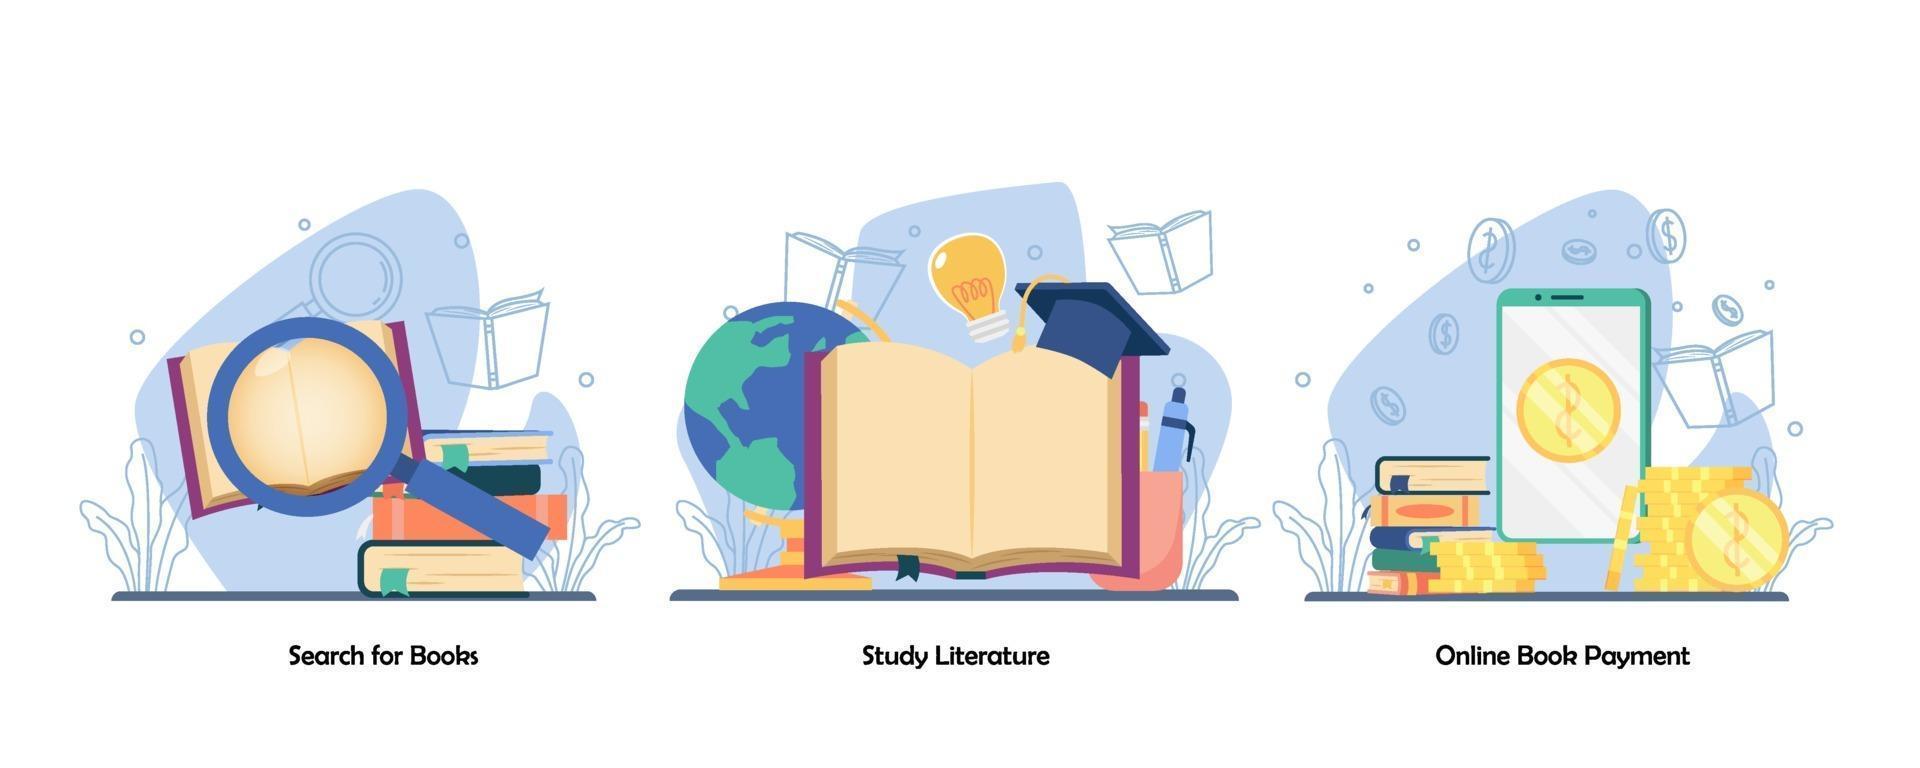 Book exploration, reading book, research, online book payment icon set. search book, study literature, digital bookstore. Vector flat design isolated concept metaphor illustrations